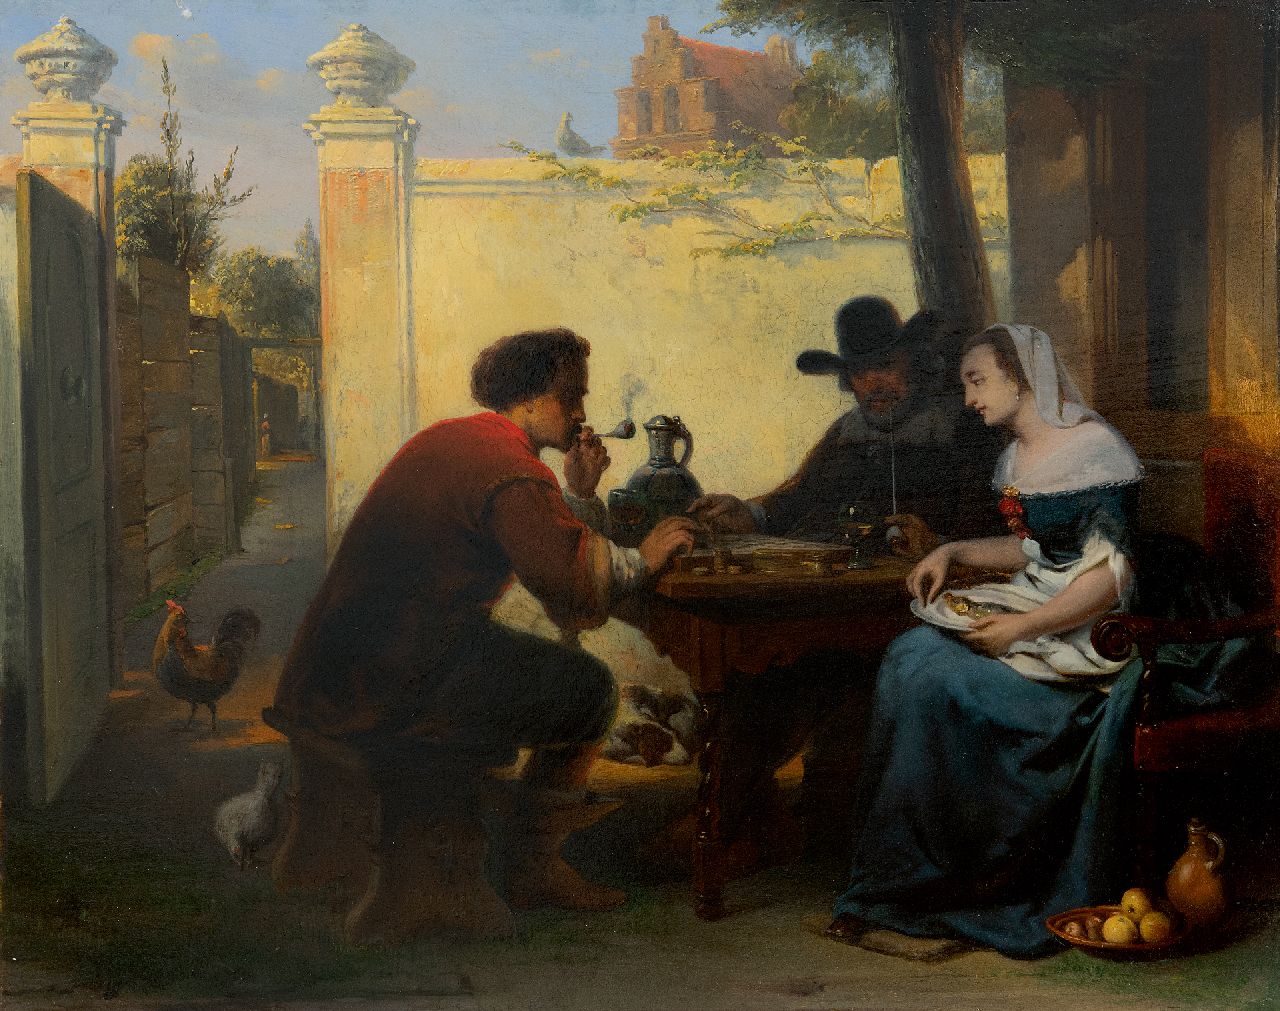 Laar J.H. van de | Jan Hendrik van de Laar | Paintings offered for sale | Playing checkers in the courtyard, oil on panel 40.8 x 51.1 cm, signed l.l. on the bench and dated 1864